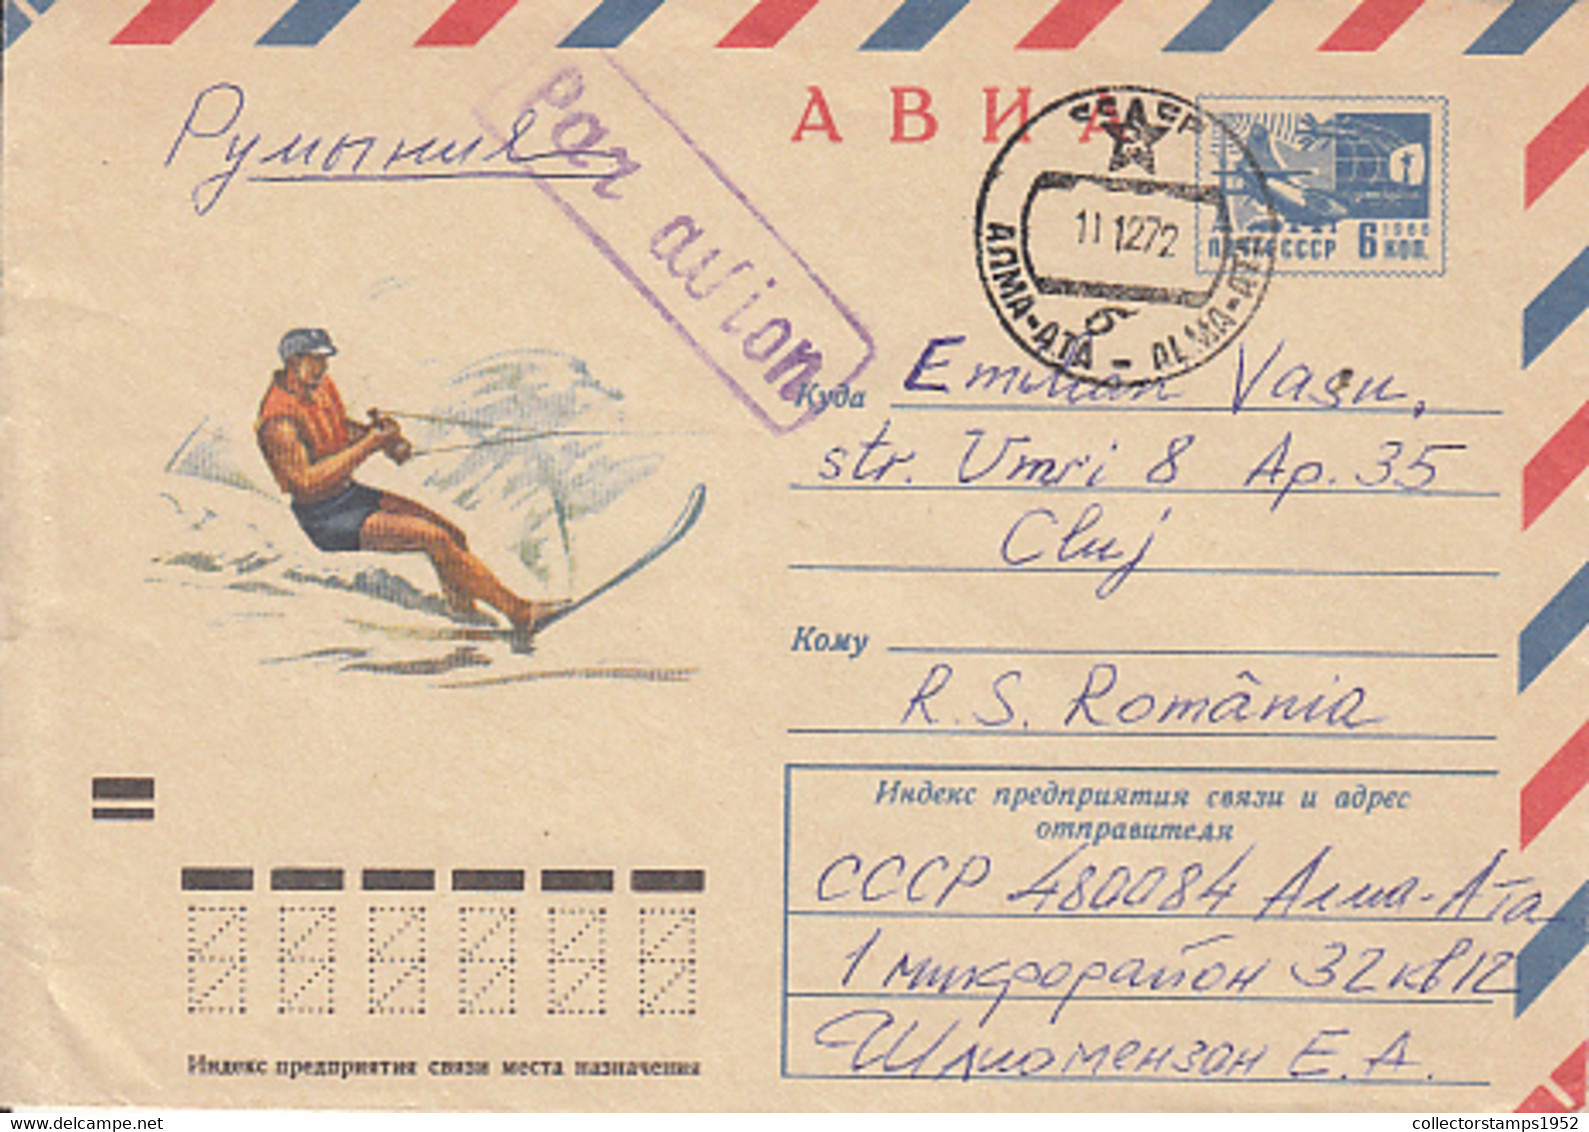 93284- WATER SKIING, SPORTS, COVER STATIONERY, 1972, RUSSIA-USSR - Ski Náutico